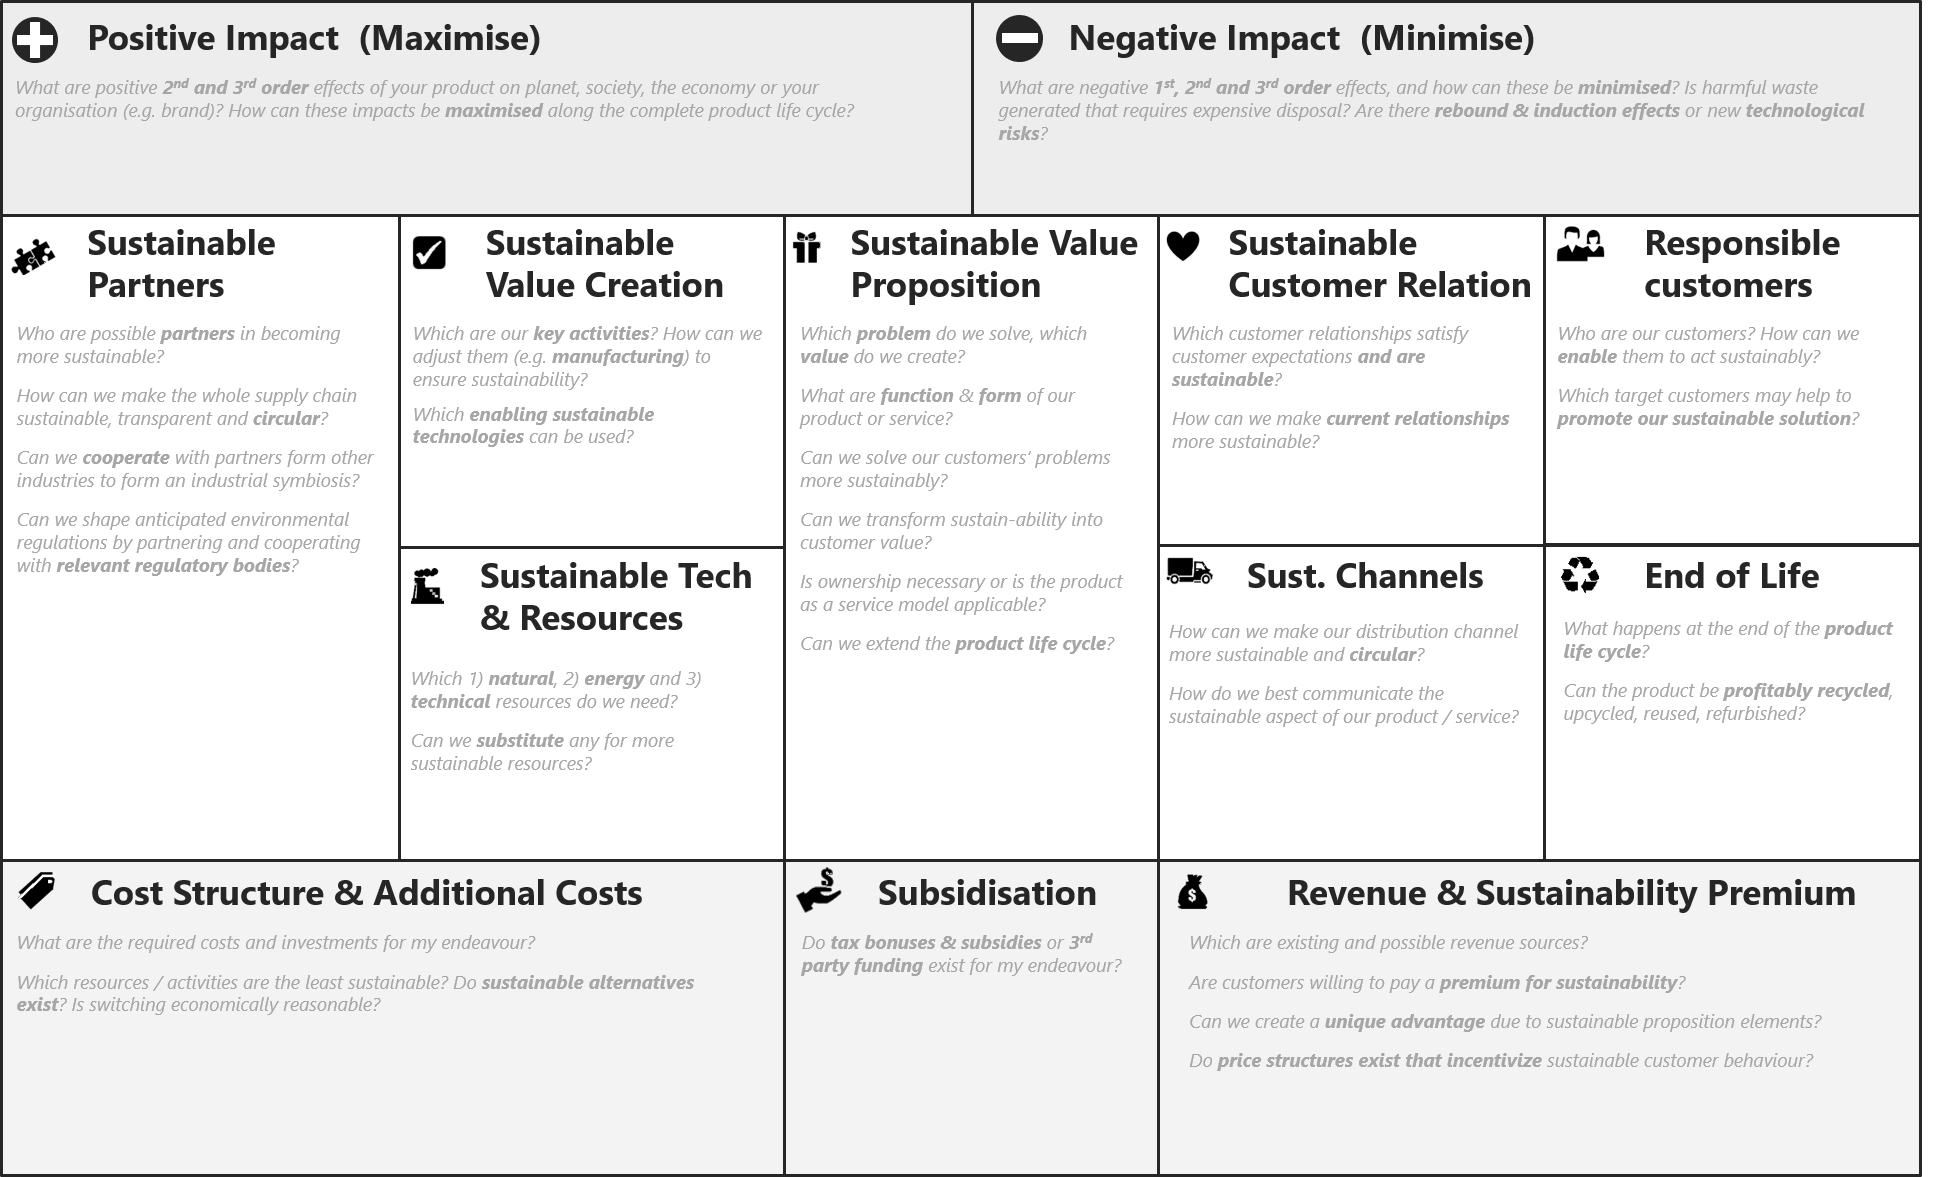 sustainable business model canvas template